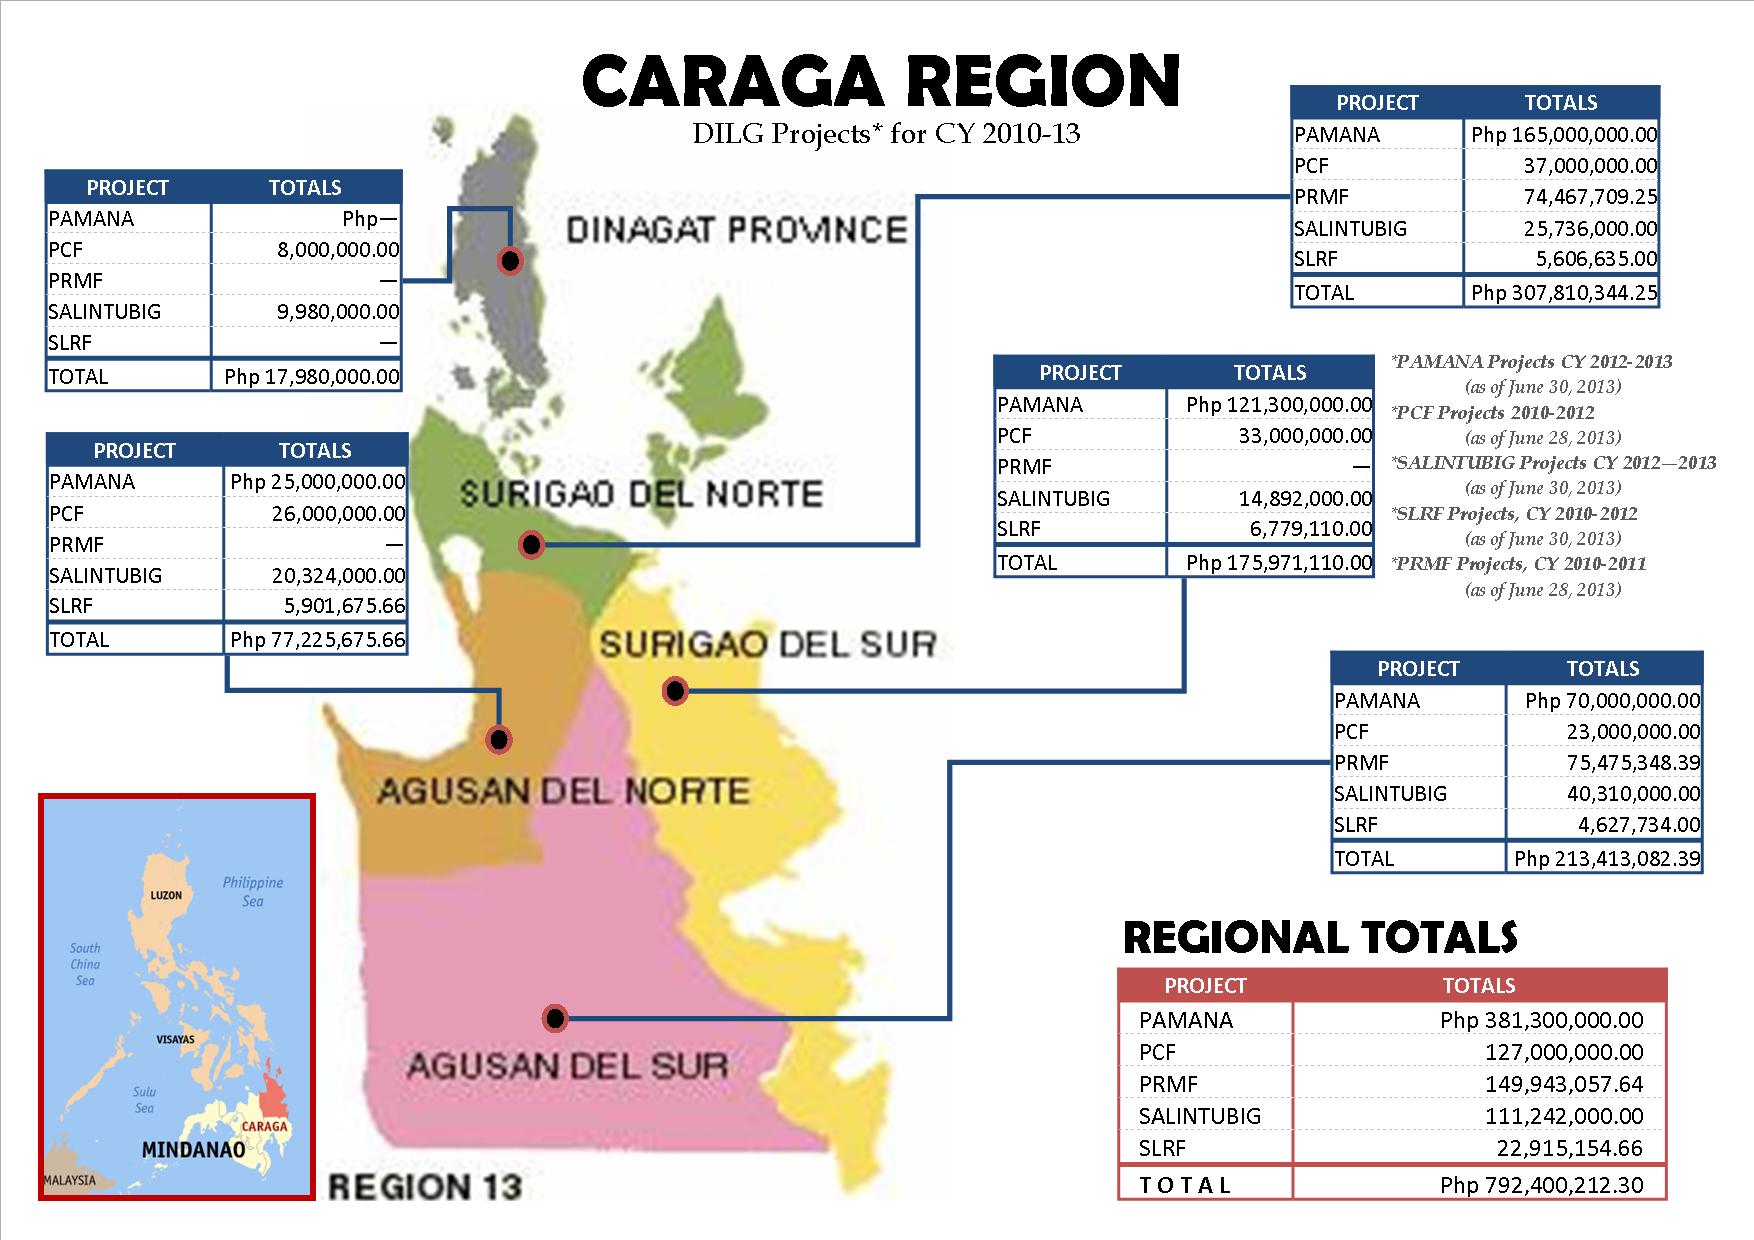 Map DILG Projects in Caraga - REGION TOTALS